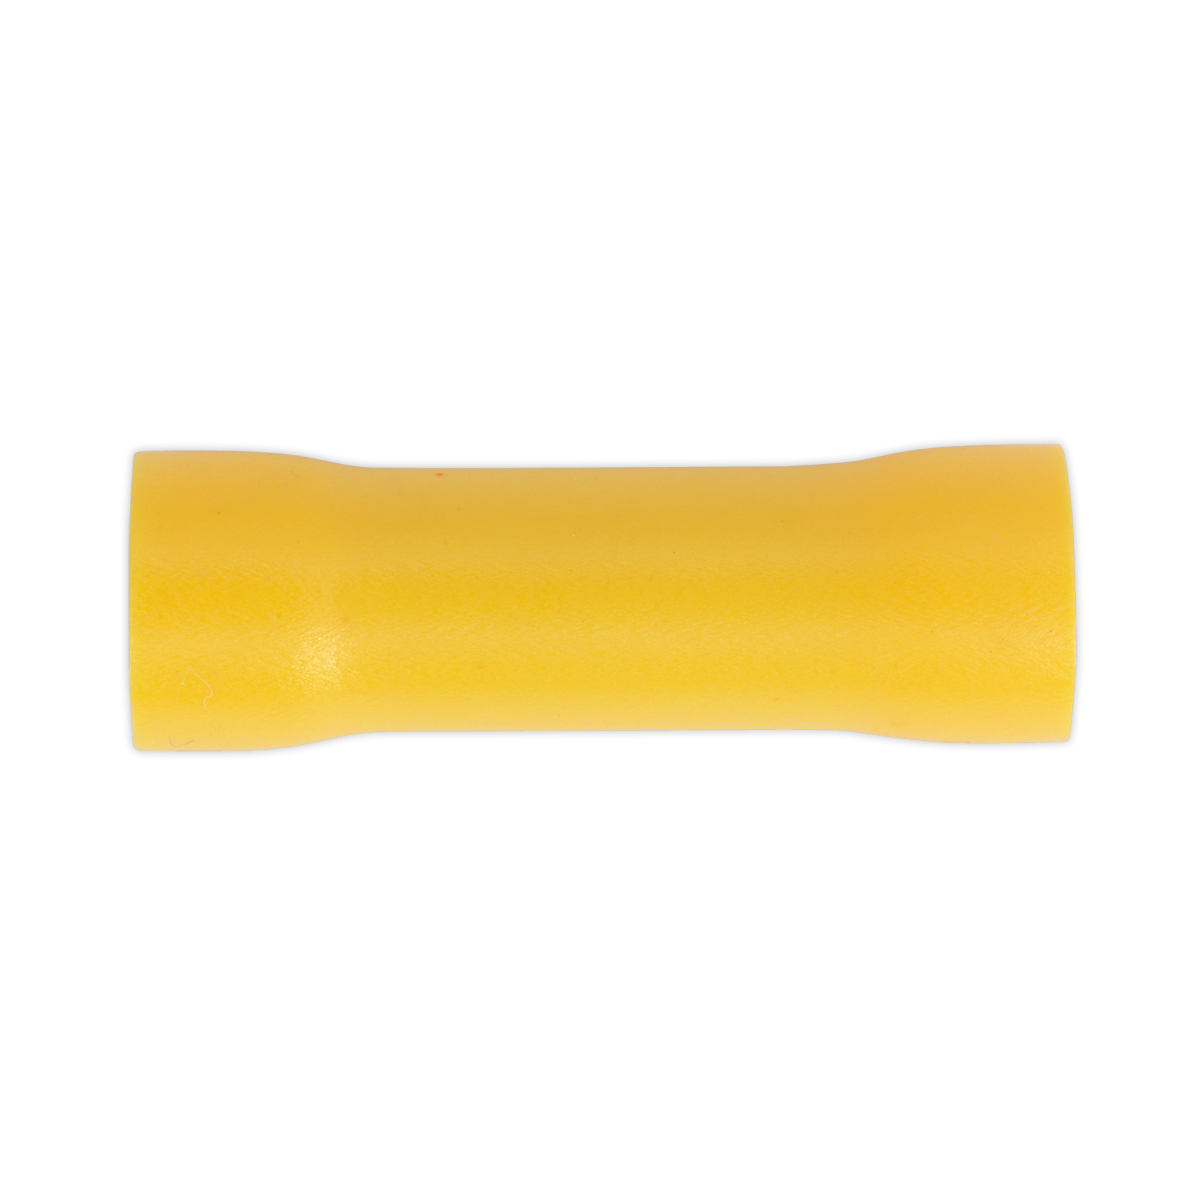 Sealey Butt Connector Terminal Ø5.5mm Yellow Pack of 100